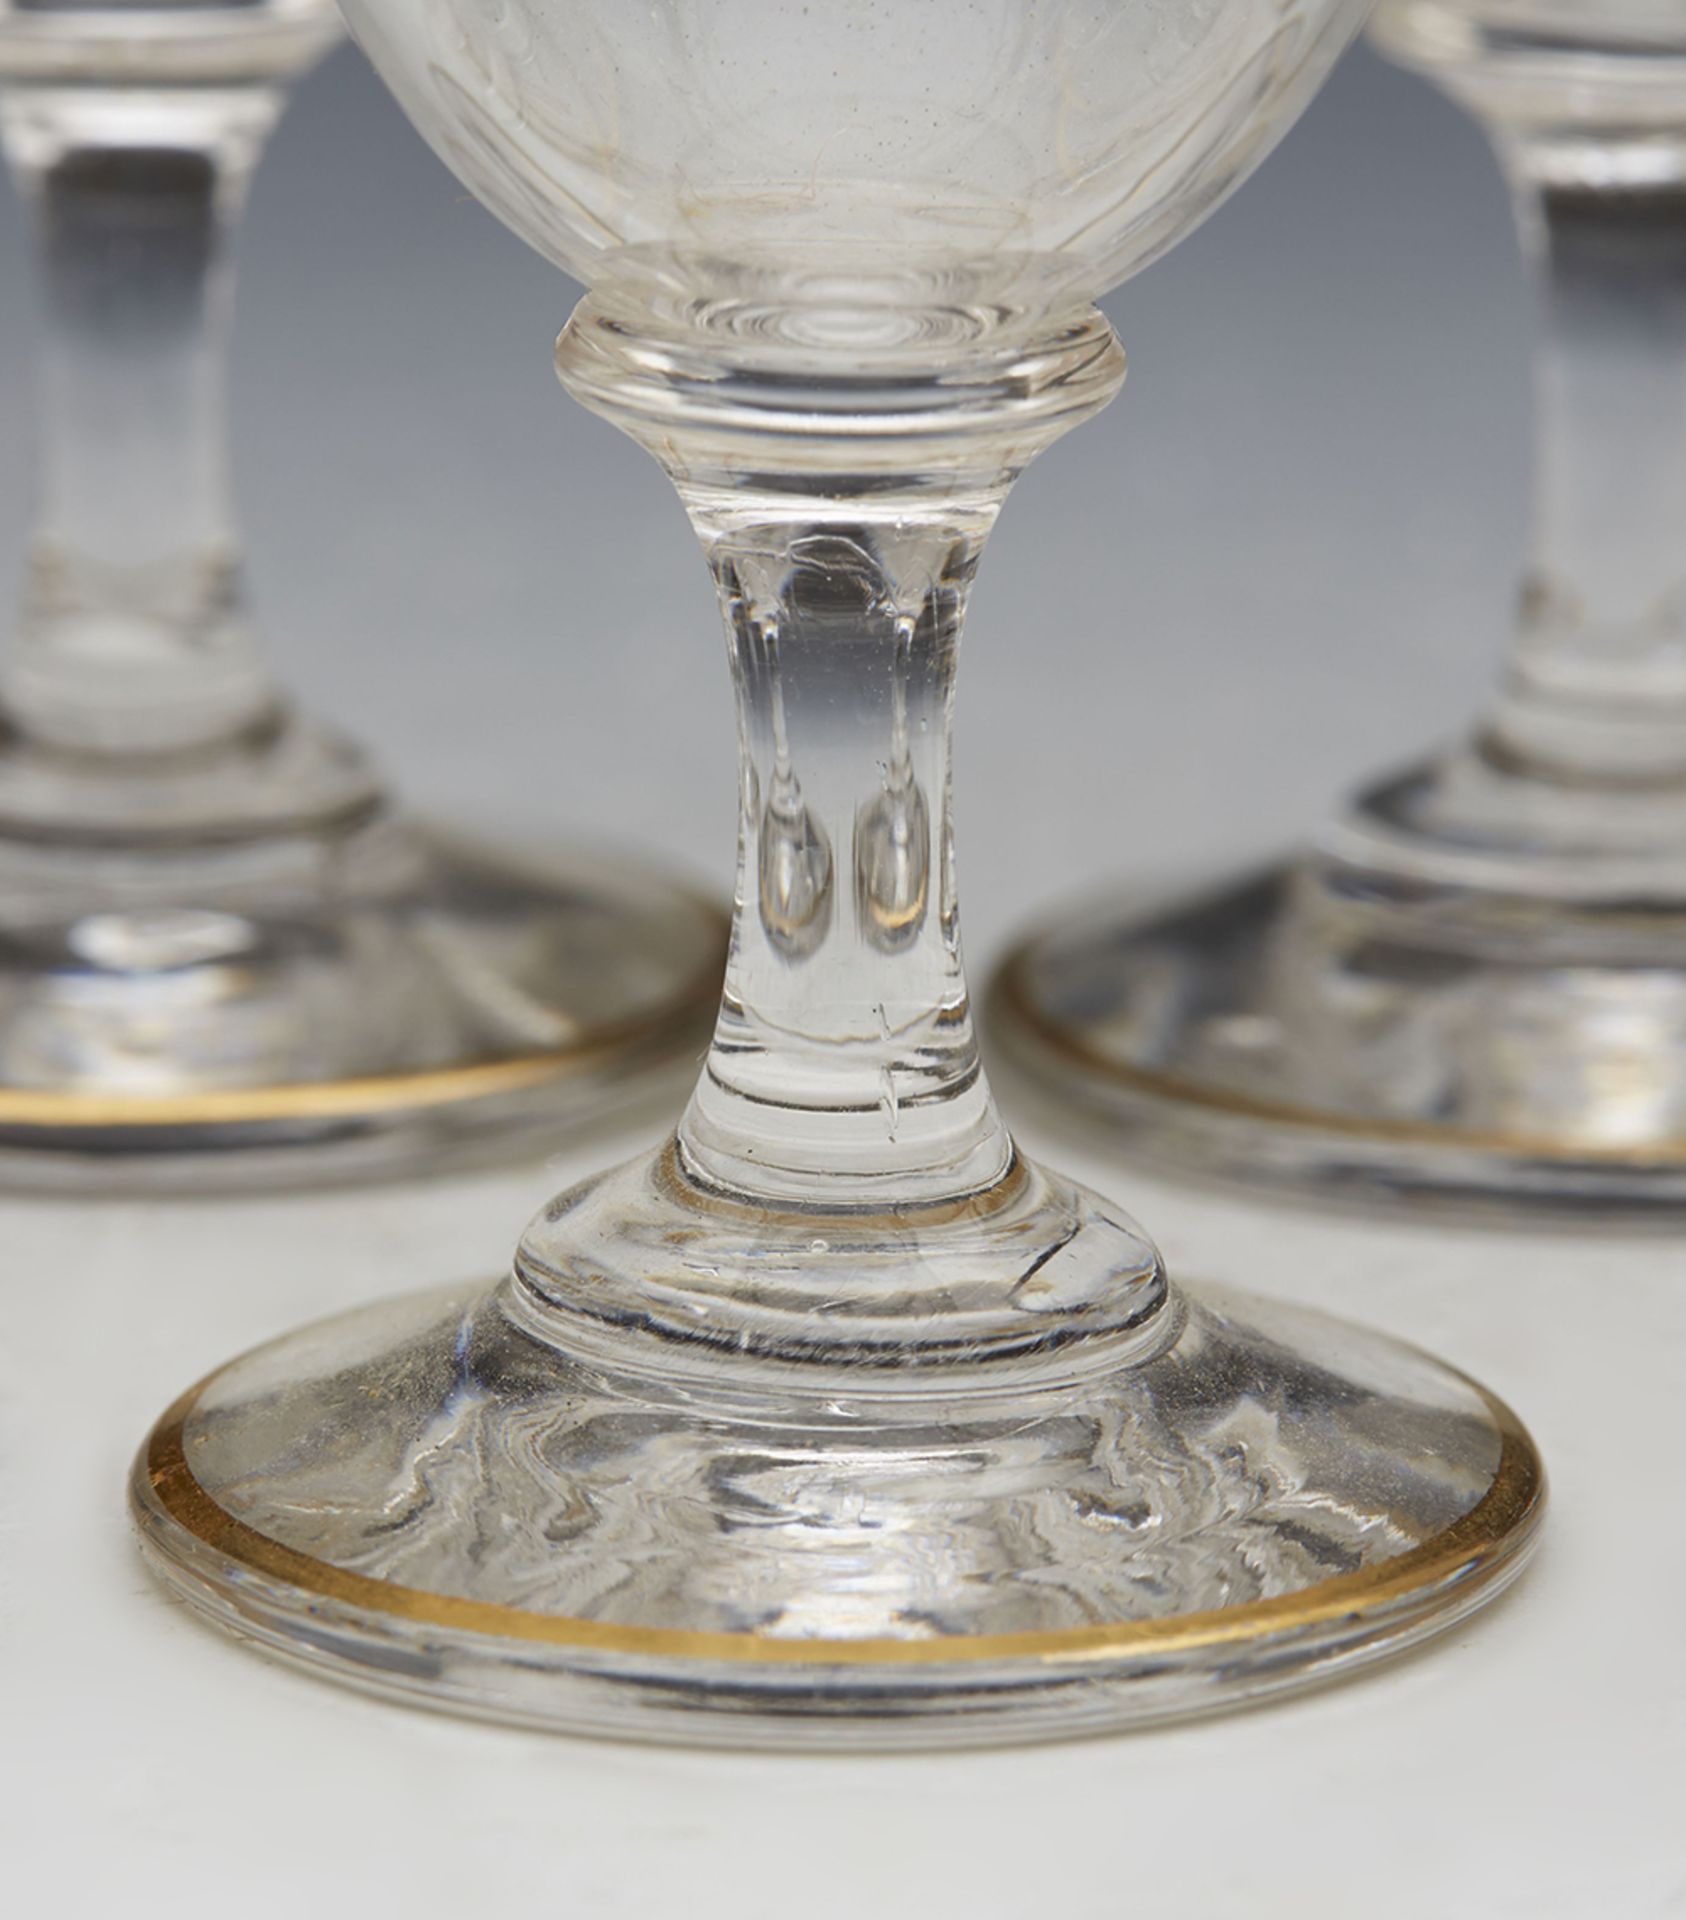 ANTIQUE ENGRAVED & GILDED LIQUEUR SET WITH GLASSES 19TH C. - Image 7 of 11